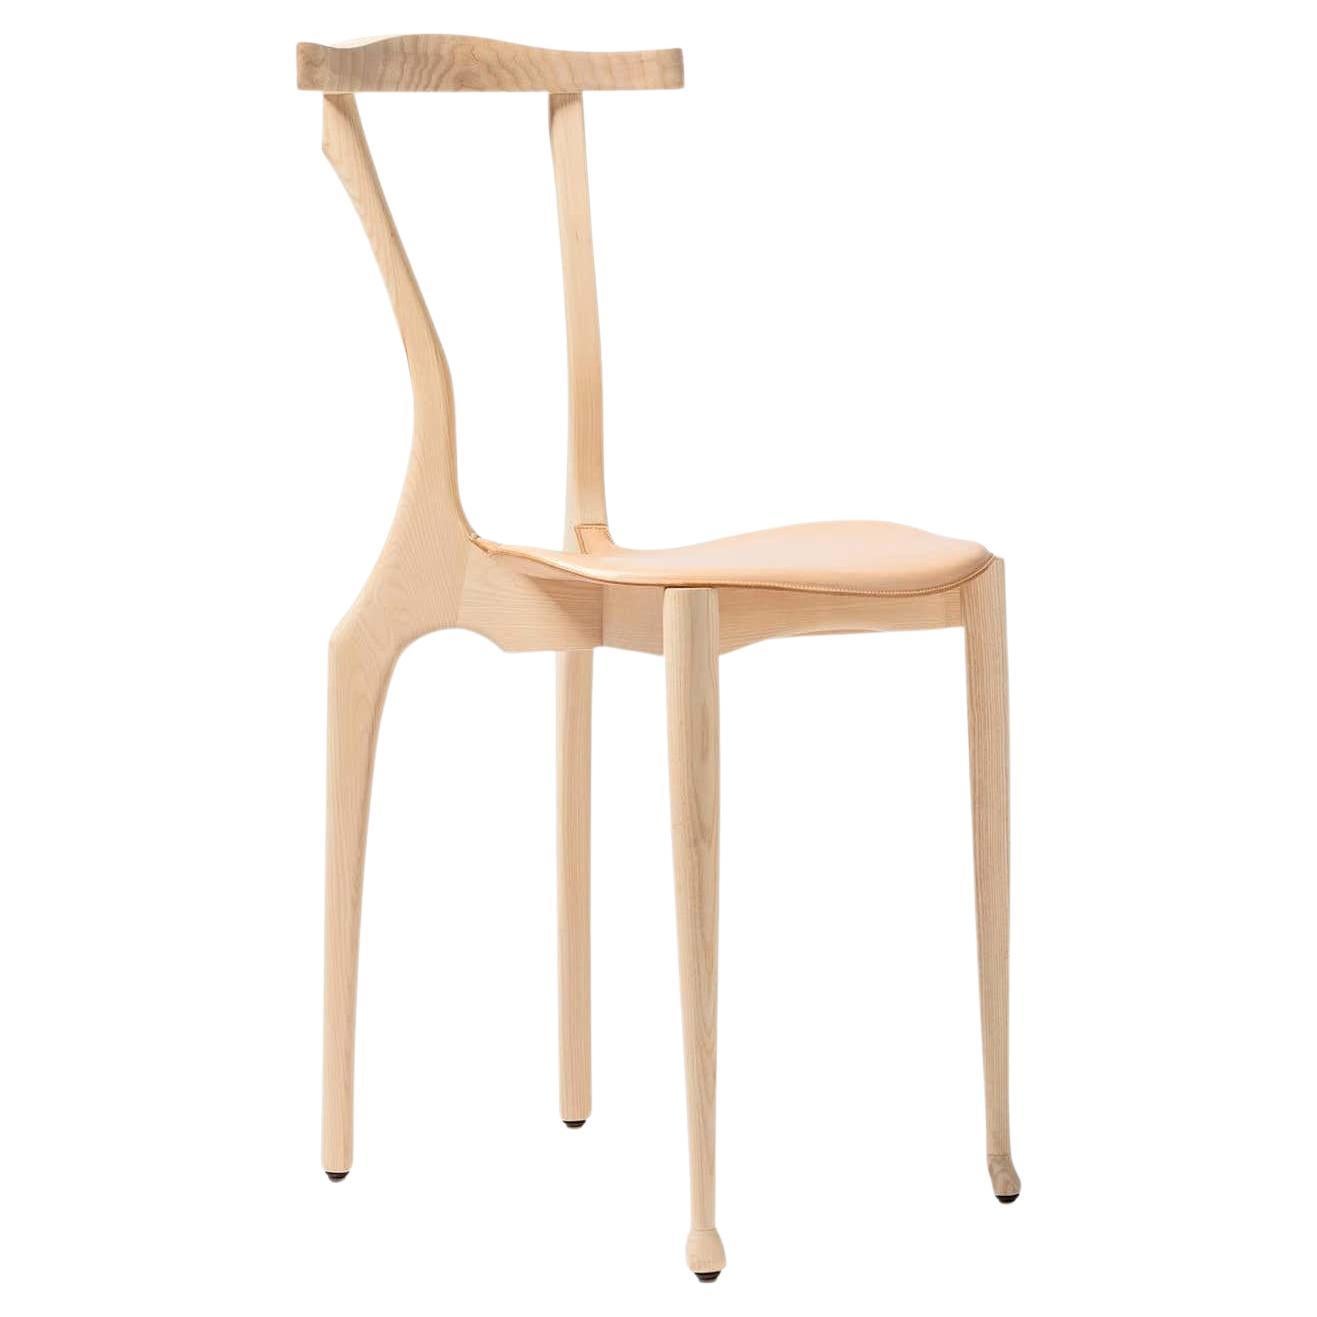 Ok! 21 Century Wood Gaulinetta Chair with Natural Wood Varnished Finish